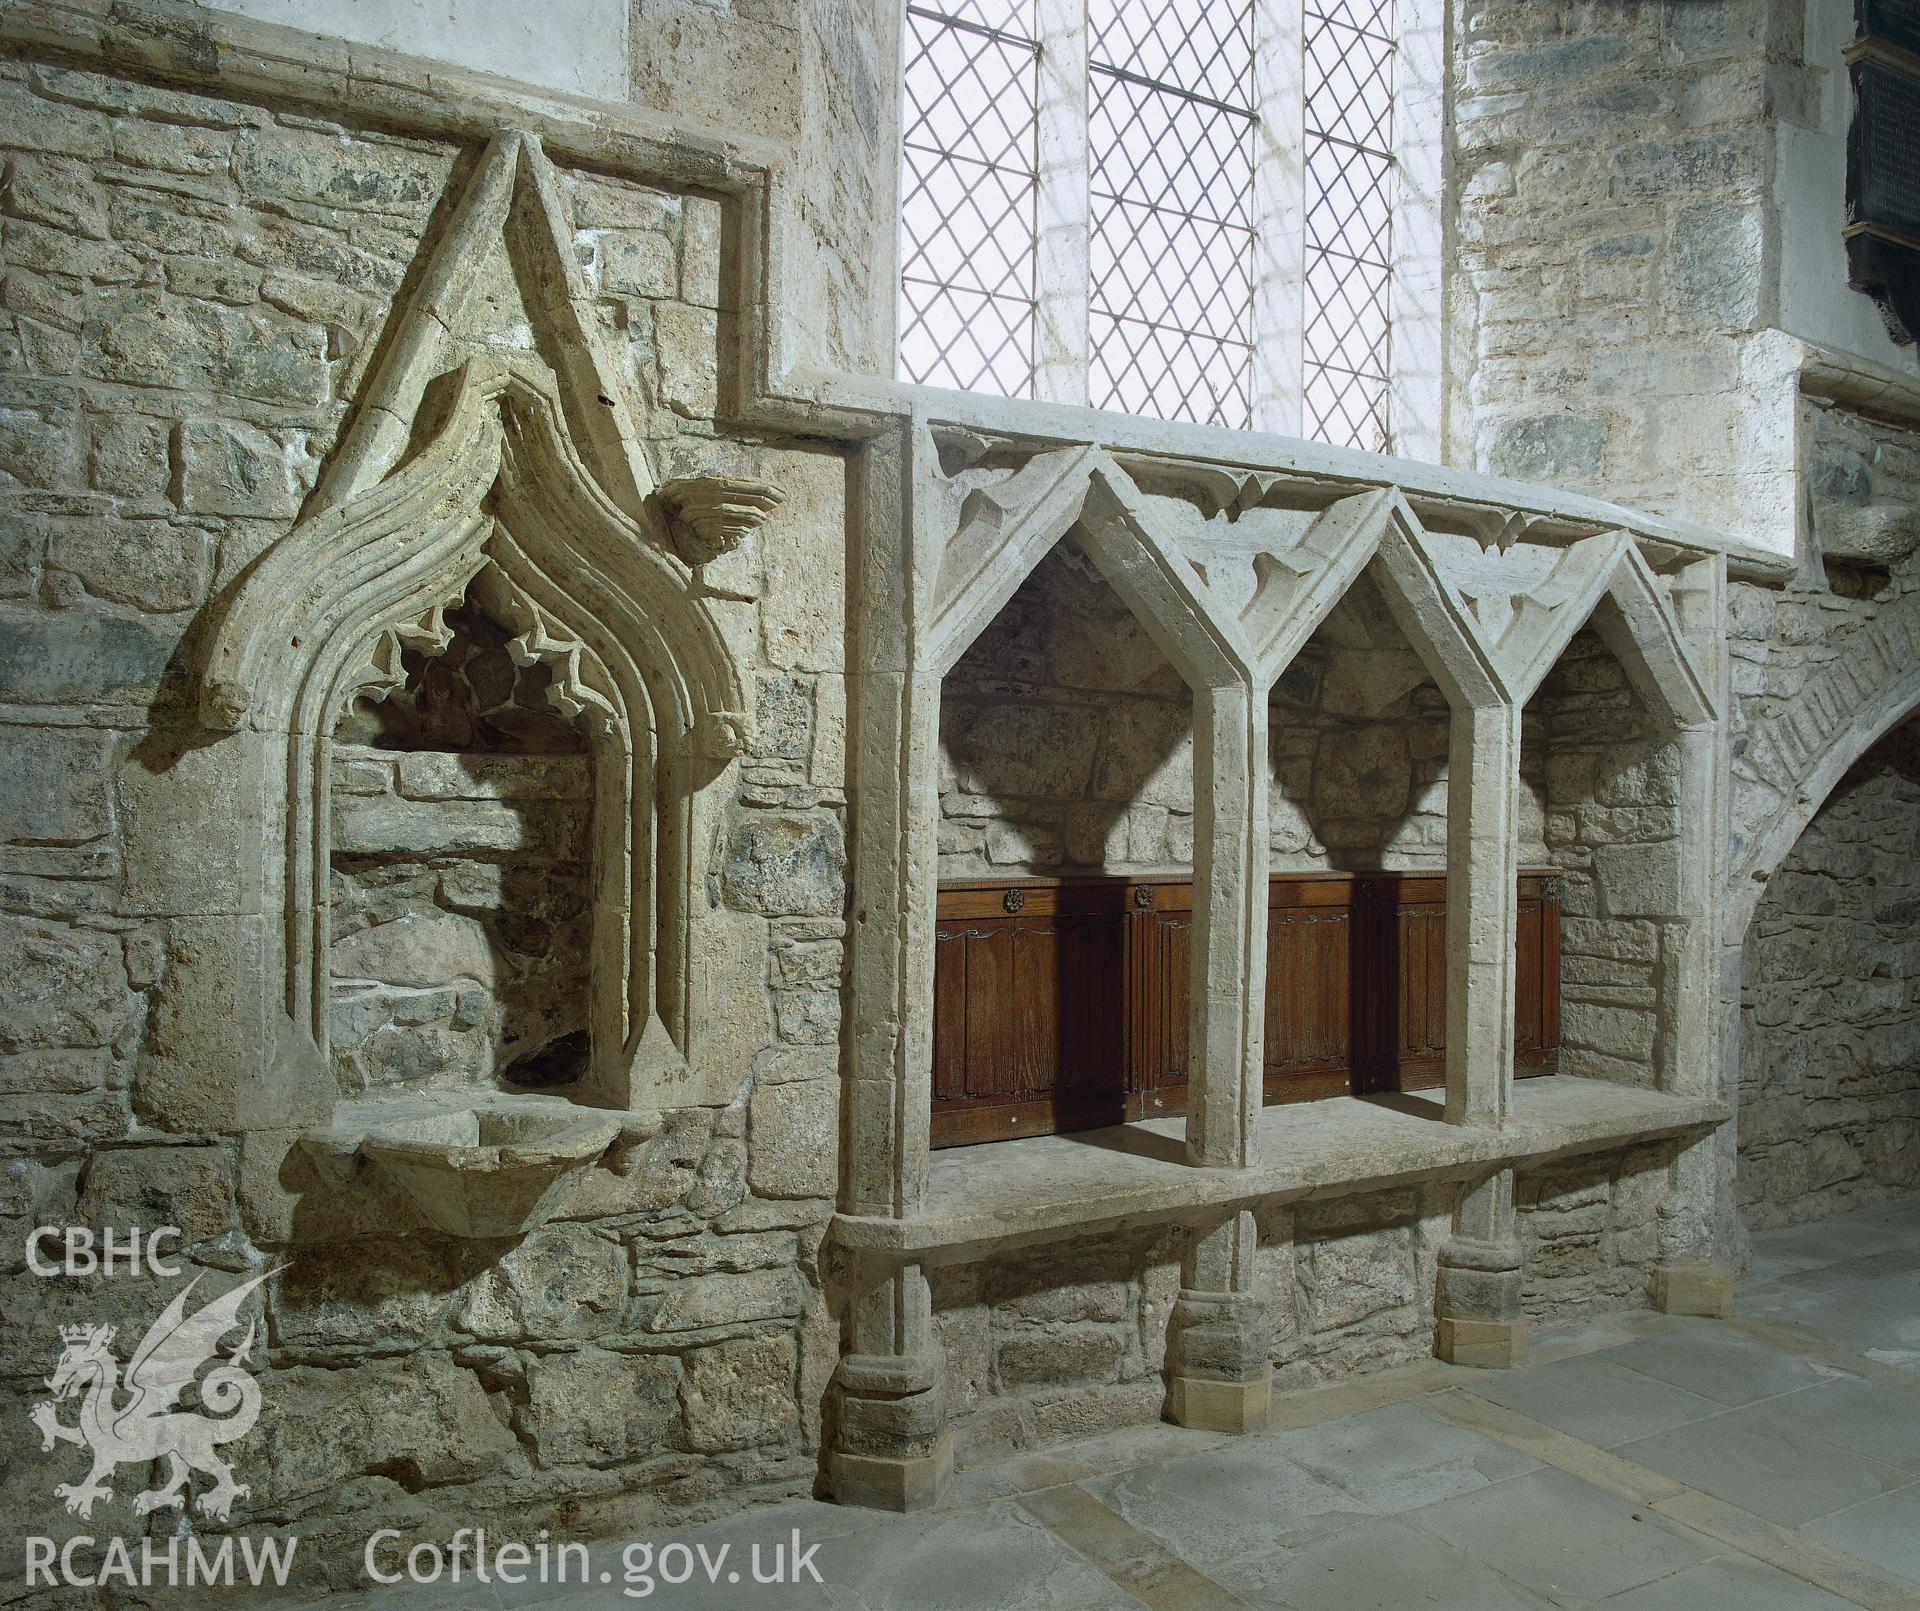 RCAHMW colour transparency showing view of sedilia  in St Mary's Church, Kidwelly.